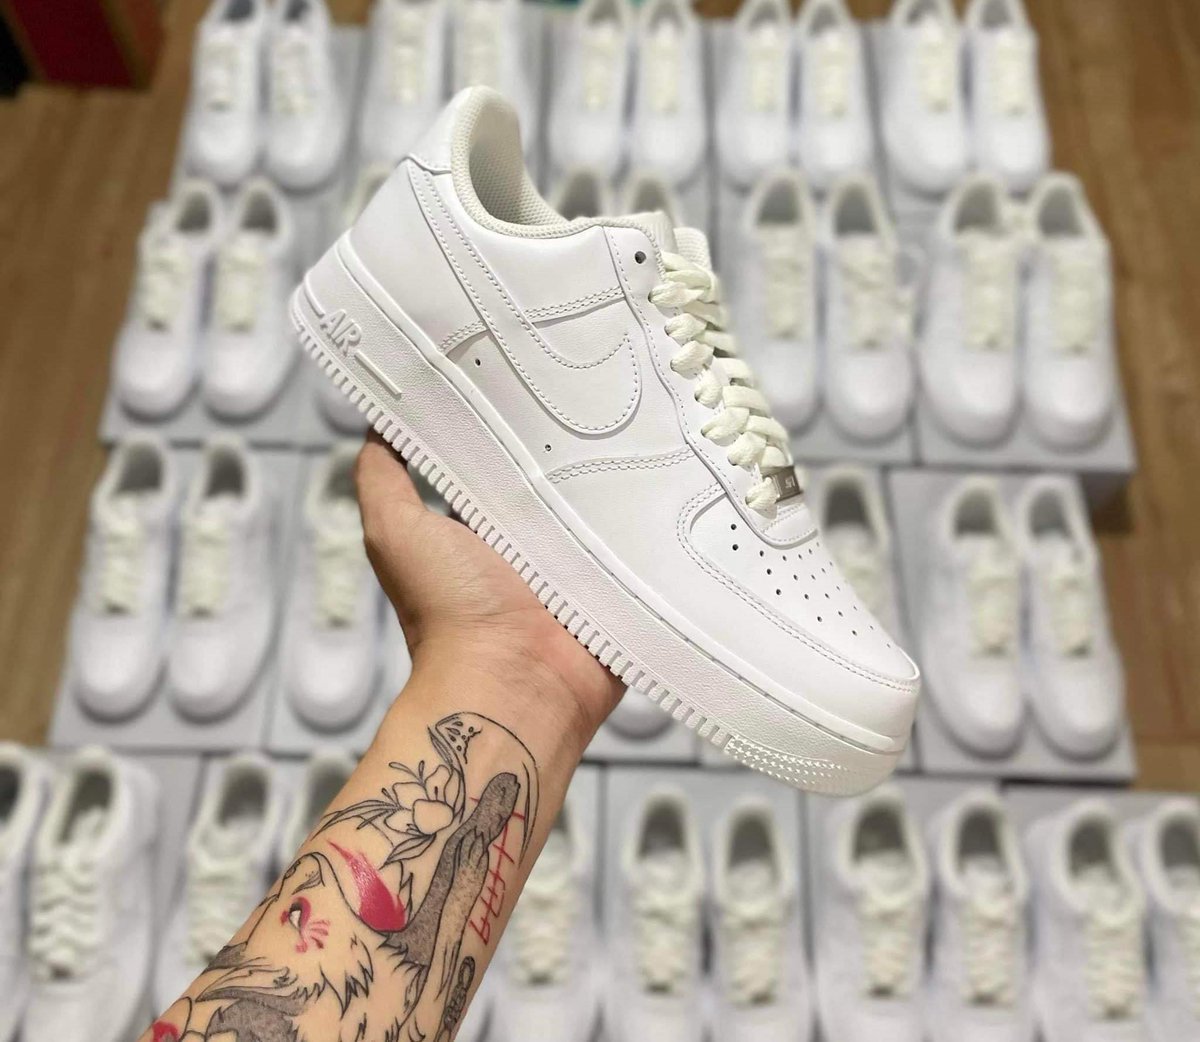 Who loves white? 🤍 ✨
Best seller
NIKE AIRFORCE1 “Triple white”

▫️Sizes 36/46
▫️COP 7/11 post office 
❌No cancellation of order

🛒 PRE-ORDER 7-10 DAYS [ORDER NOW!]